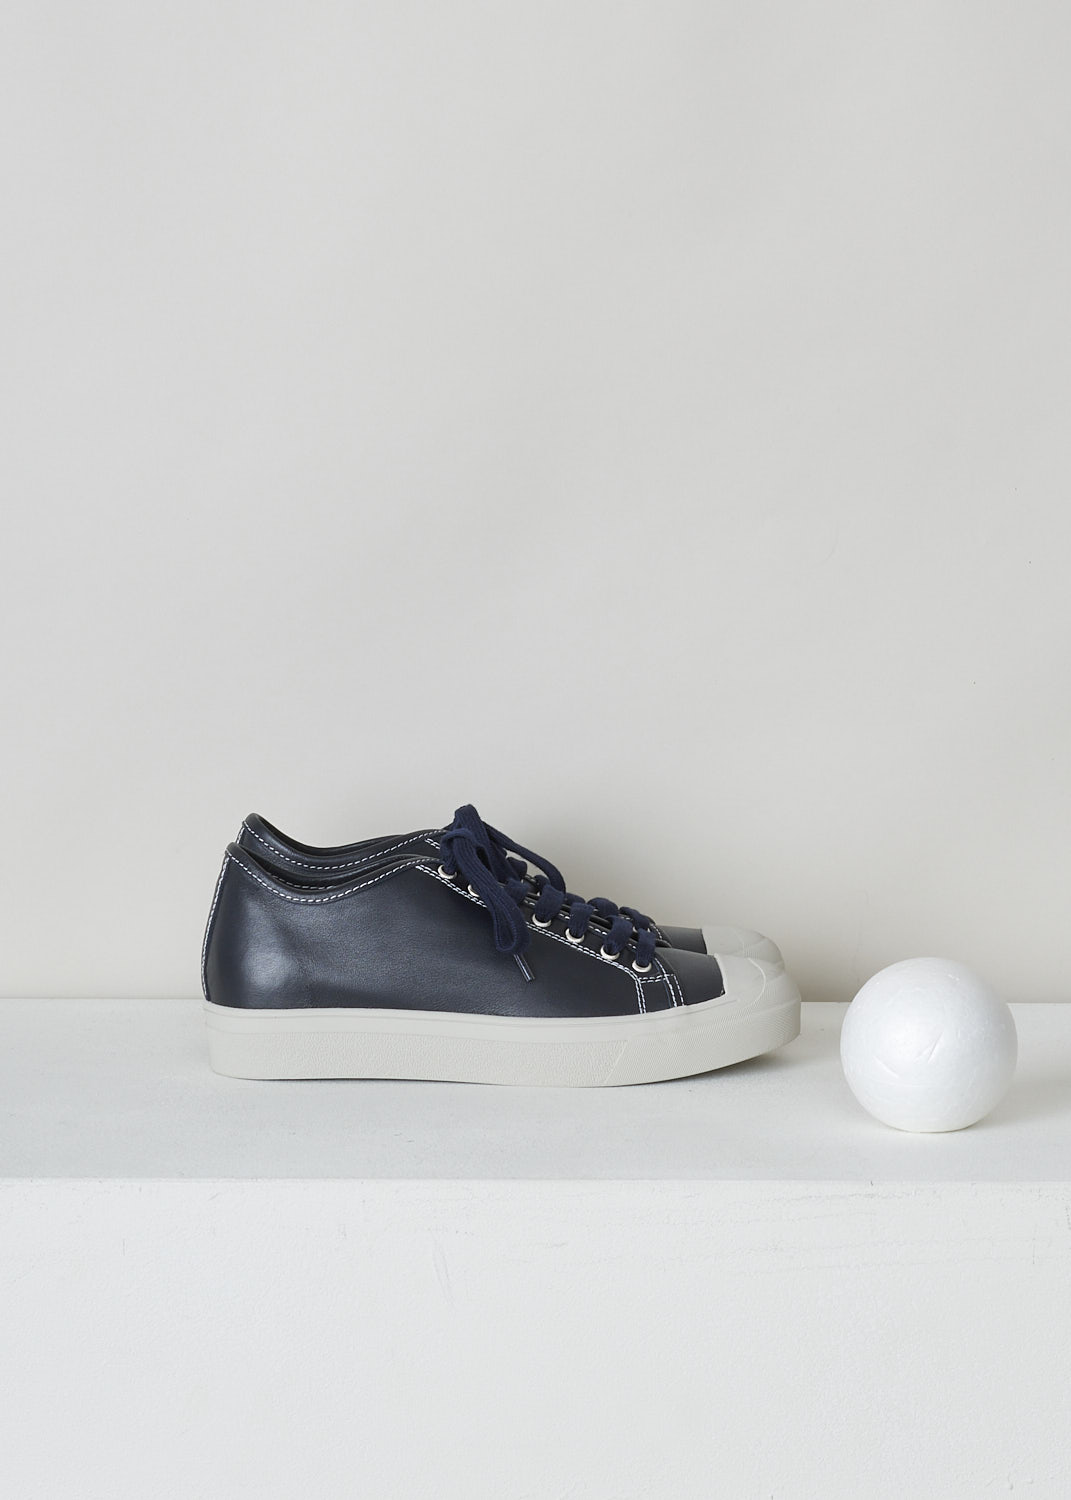 SOFIE D’HOORE, MIDNIGHT BLUE LEATHER SHOES, FOLK_LMAST_LMAST_MIDNIGHT, Blue, Side, These midnight blue leather sneakers feature a front lace-up closure with dark blue laces. These sneakers have a round toe with a white rubber toe cap that goes down into the white rubber sole. Contrasting white stitching is used throughout. The sneakers come with additional pair of white laces.
